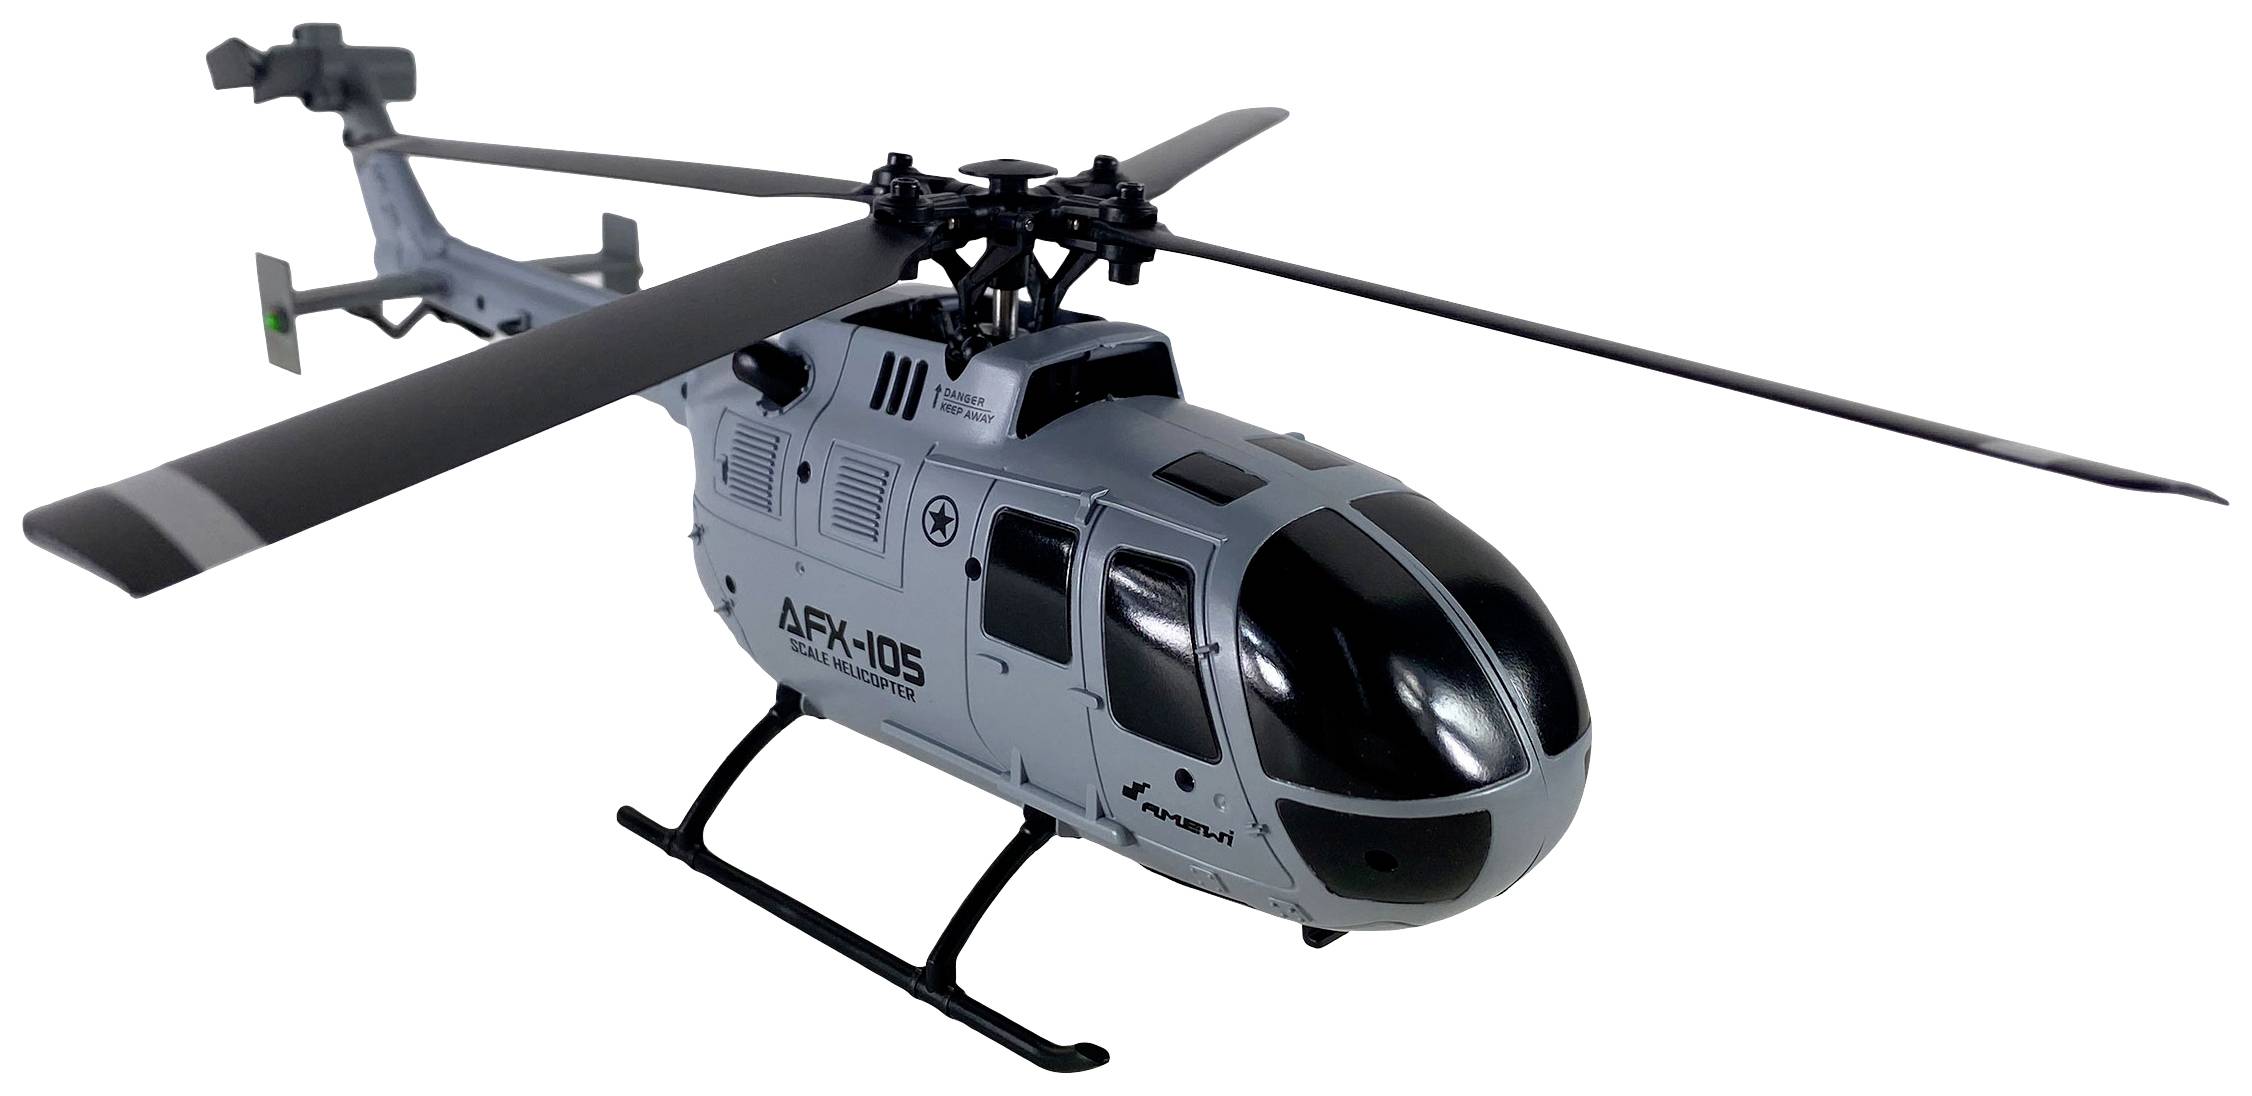 Amewi AFX-105 RC model helicopter for beginners RtF | Conrad.com